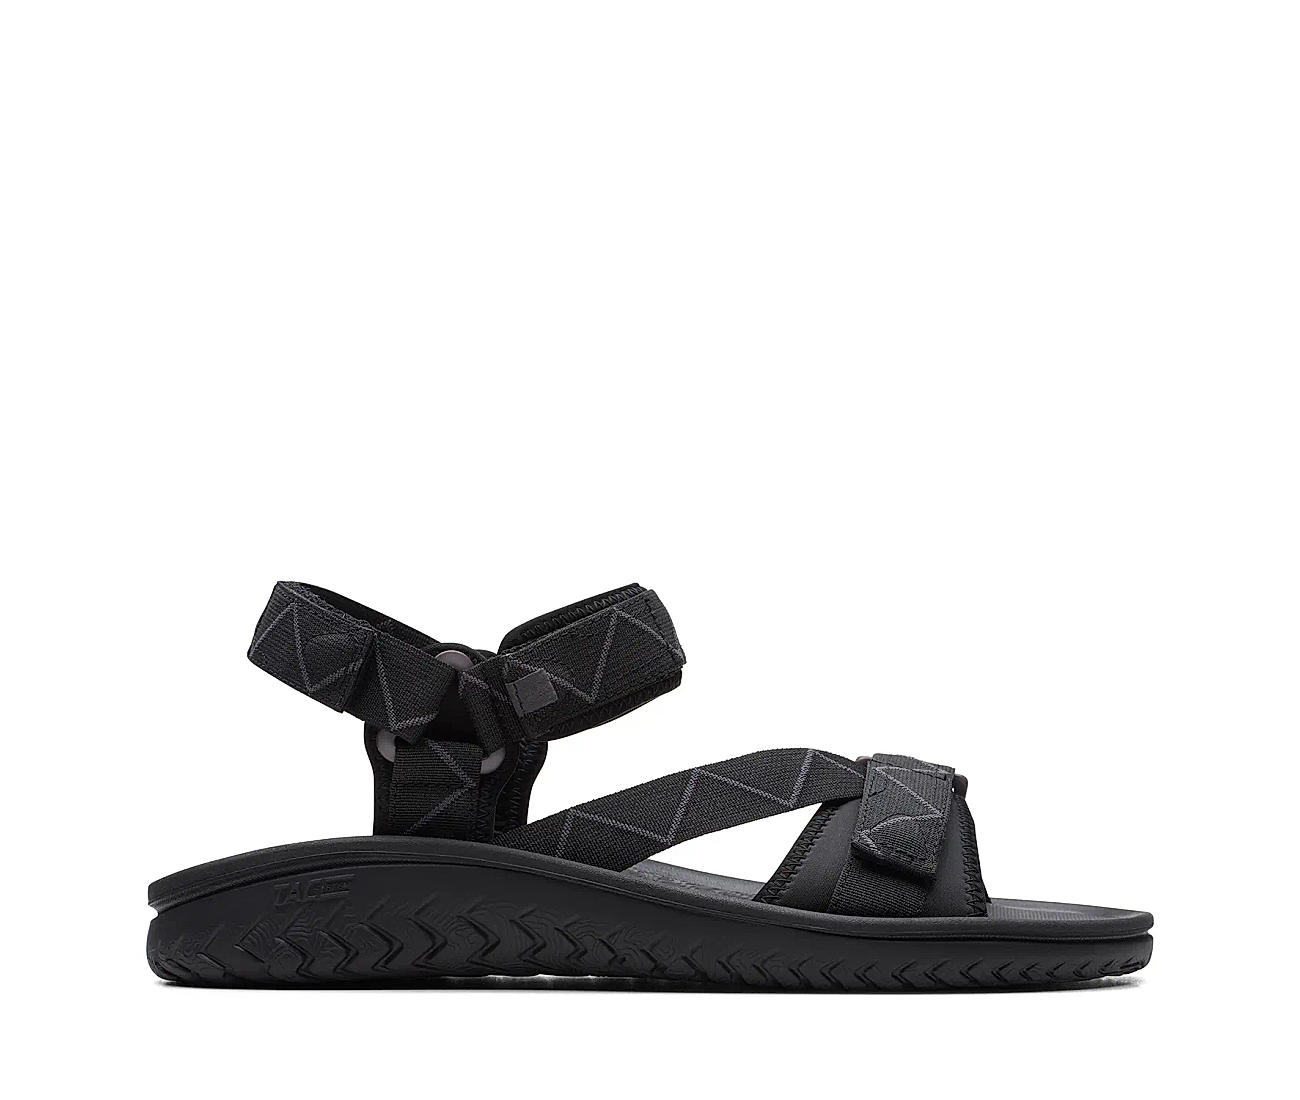 Ist looks Shoes - New Arrival CLARKS Imported best quality Sandals for men  Price PKR 4,300 Cash on delivery All over pakistan Money back Guarantee  Artical # K4106 Three colour Available Black,Brown,